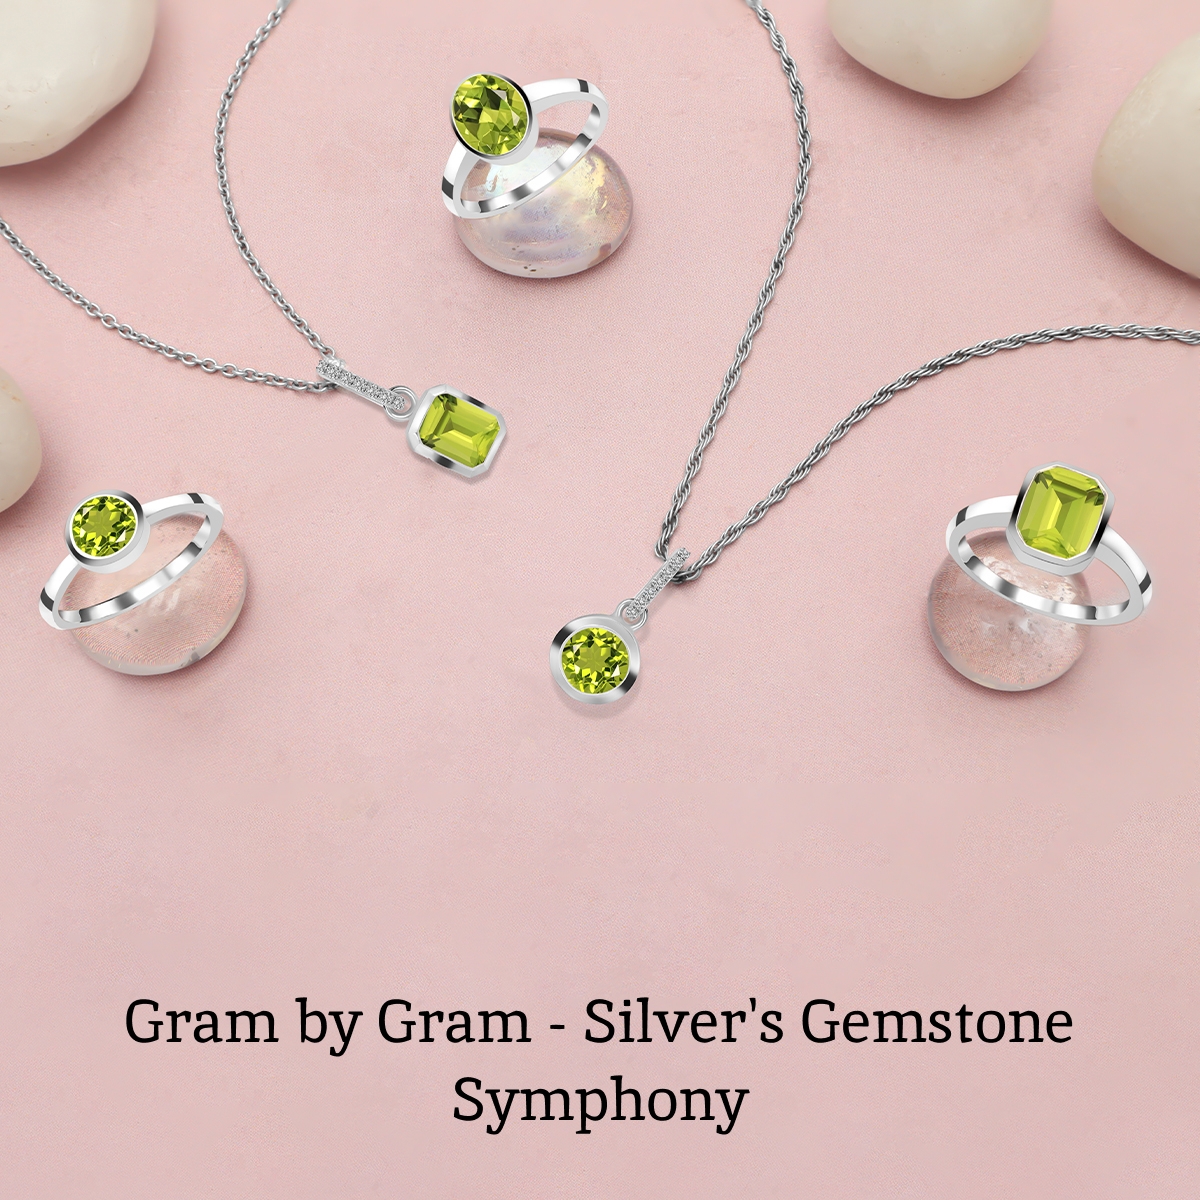 What is Silver Gemstone Jewelry In Gram?